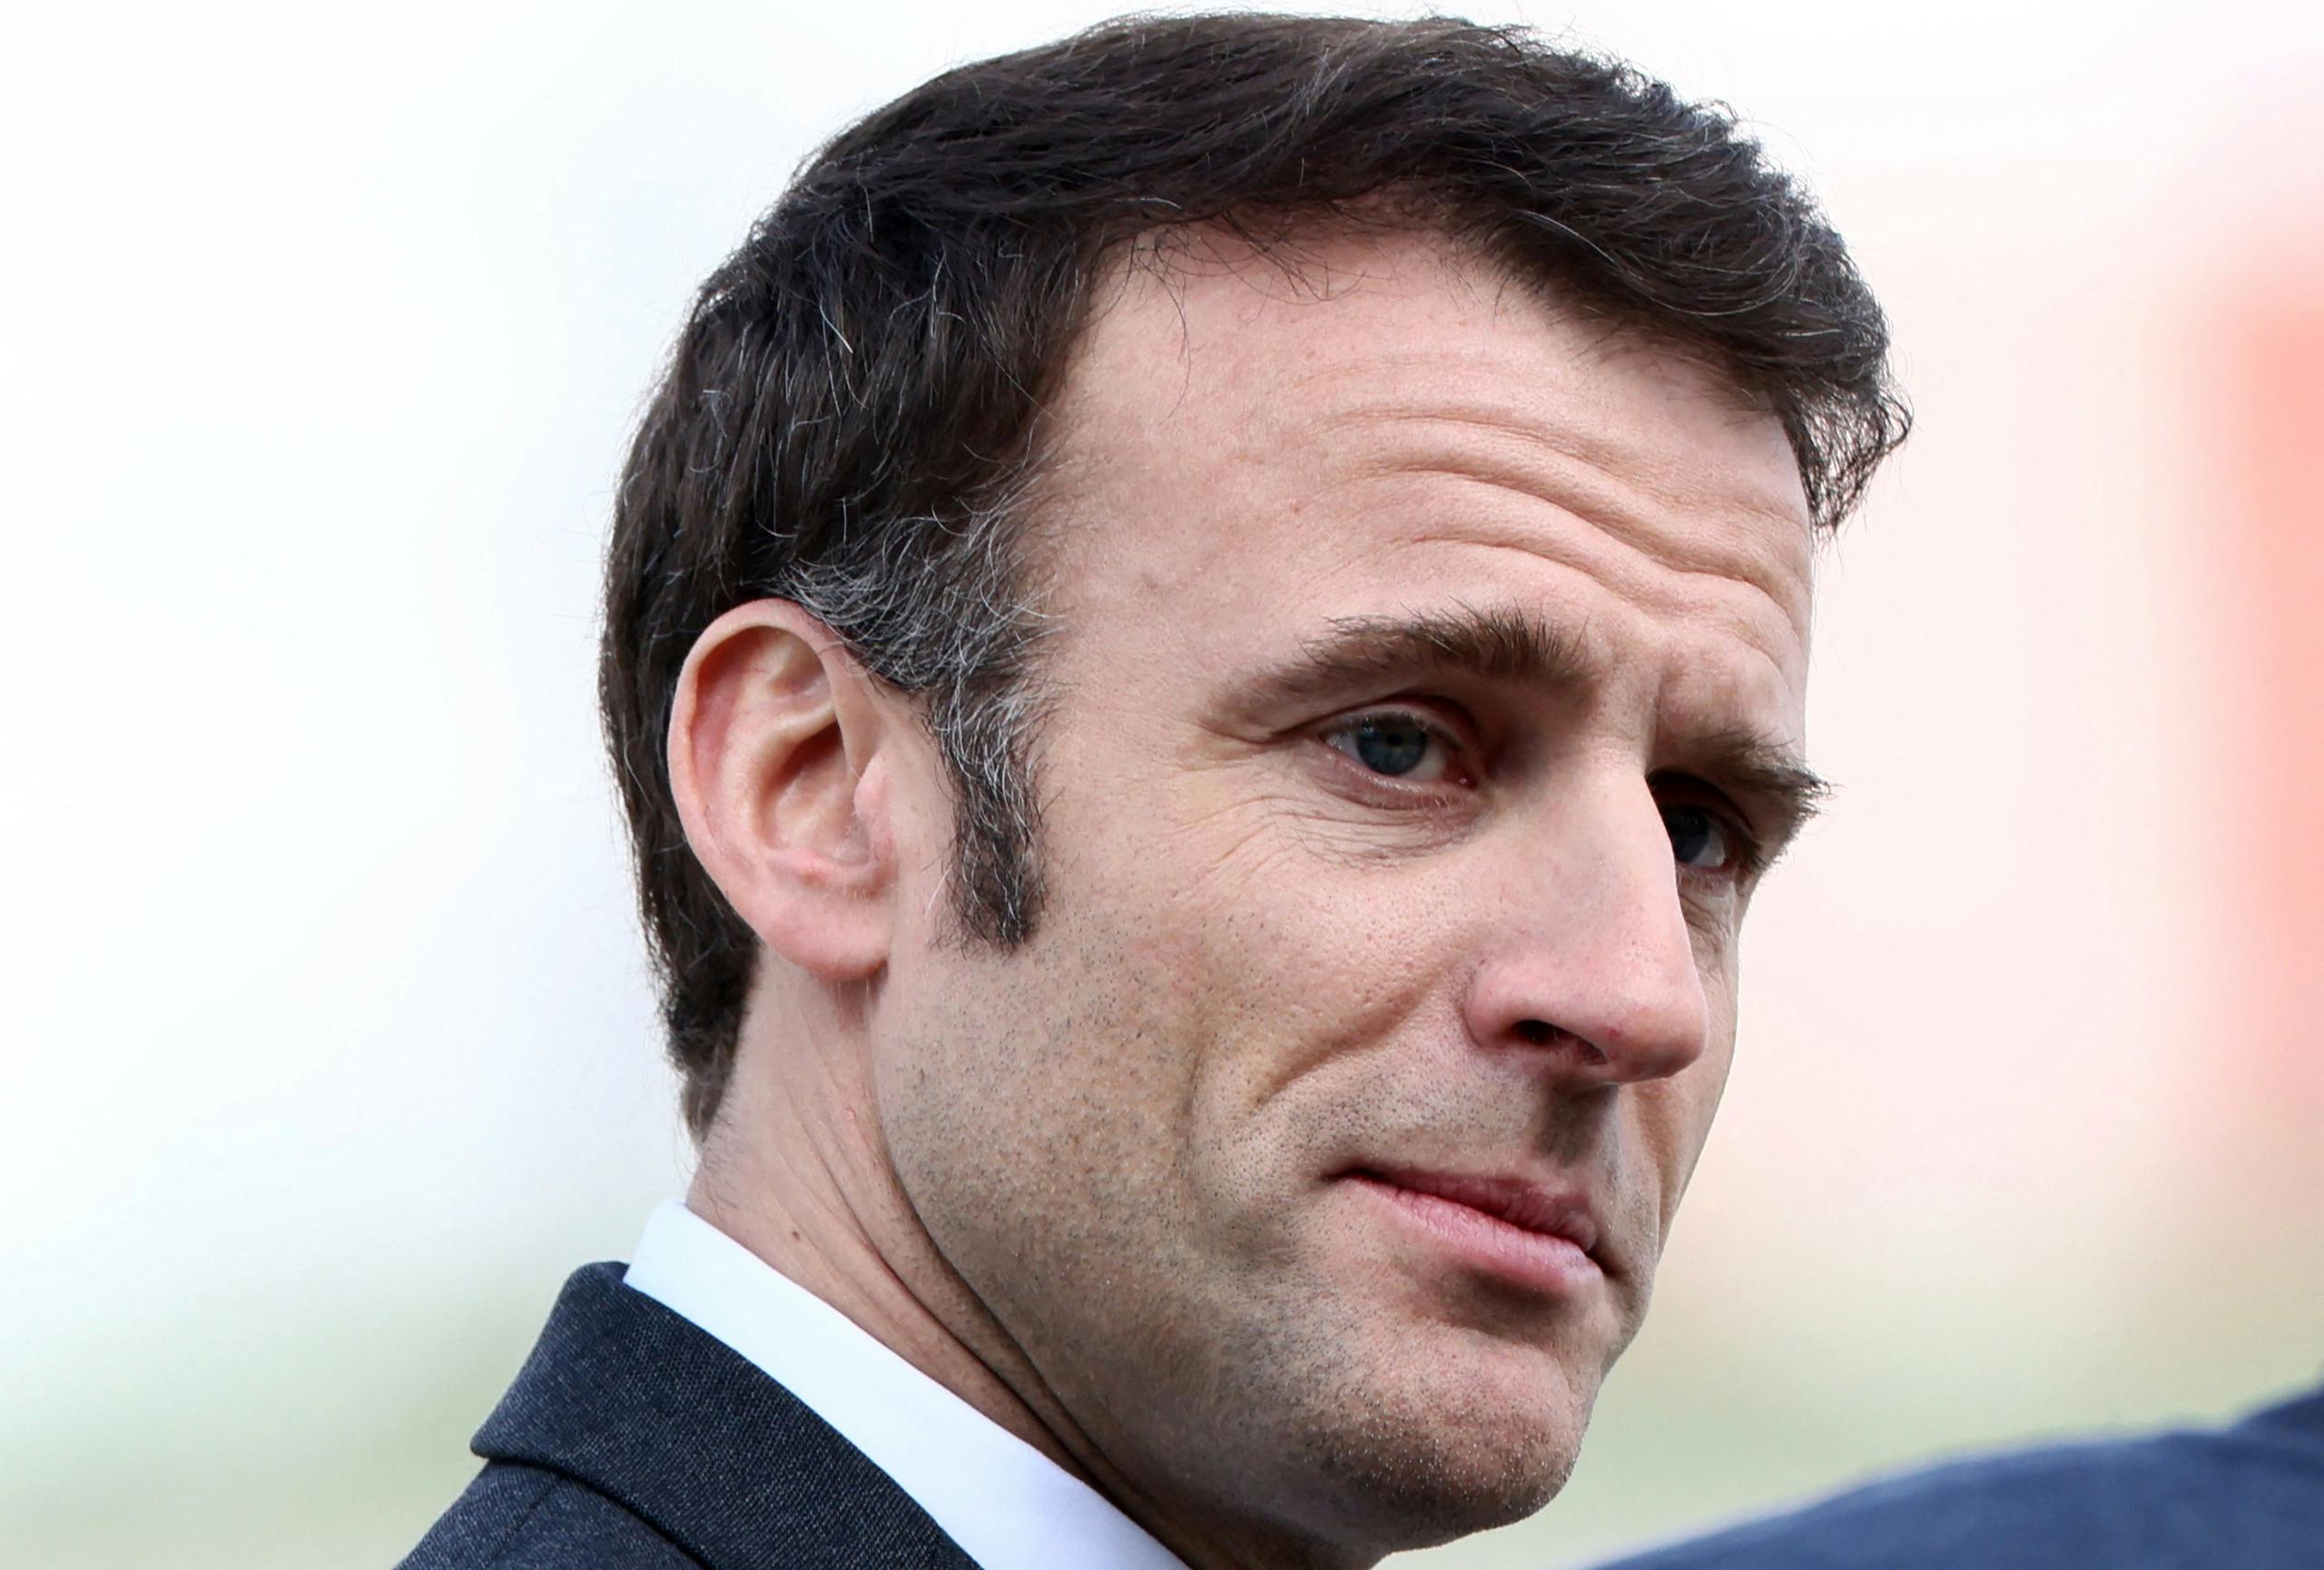 Macron now has a real image problem